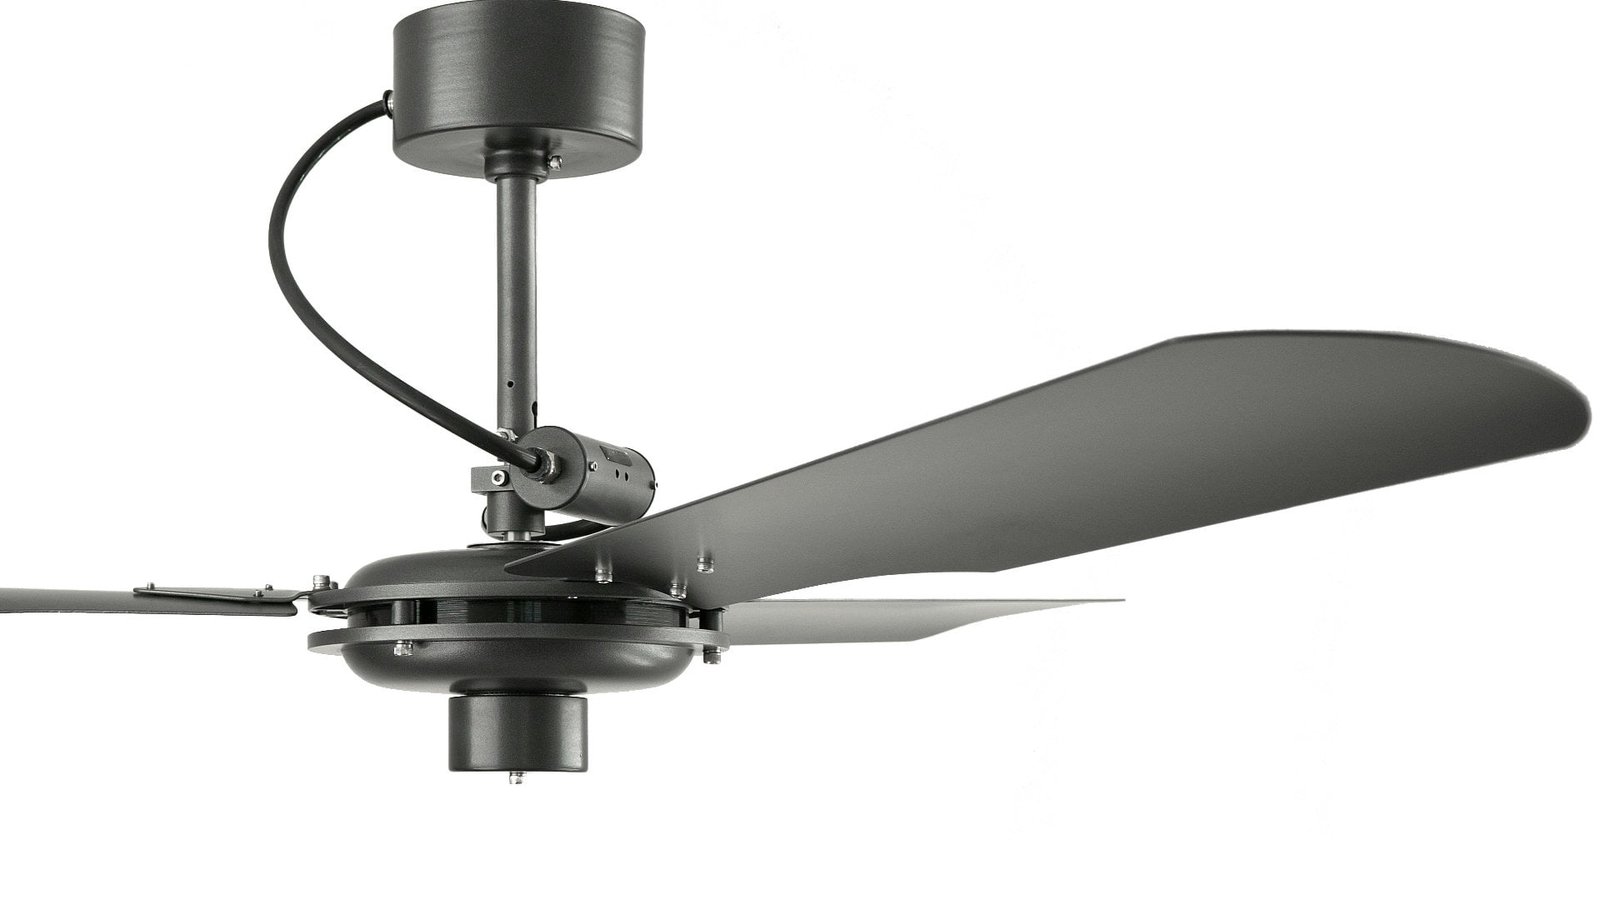 true industrial design ceiling fan. Exposed wire harness with capacitor tubes. edge cut blade design makes this fan truly industrial influenced.